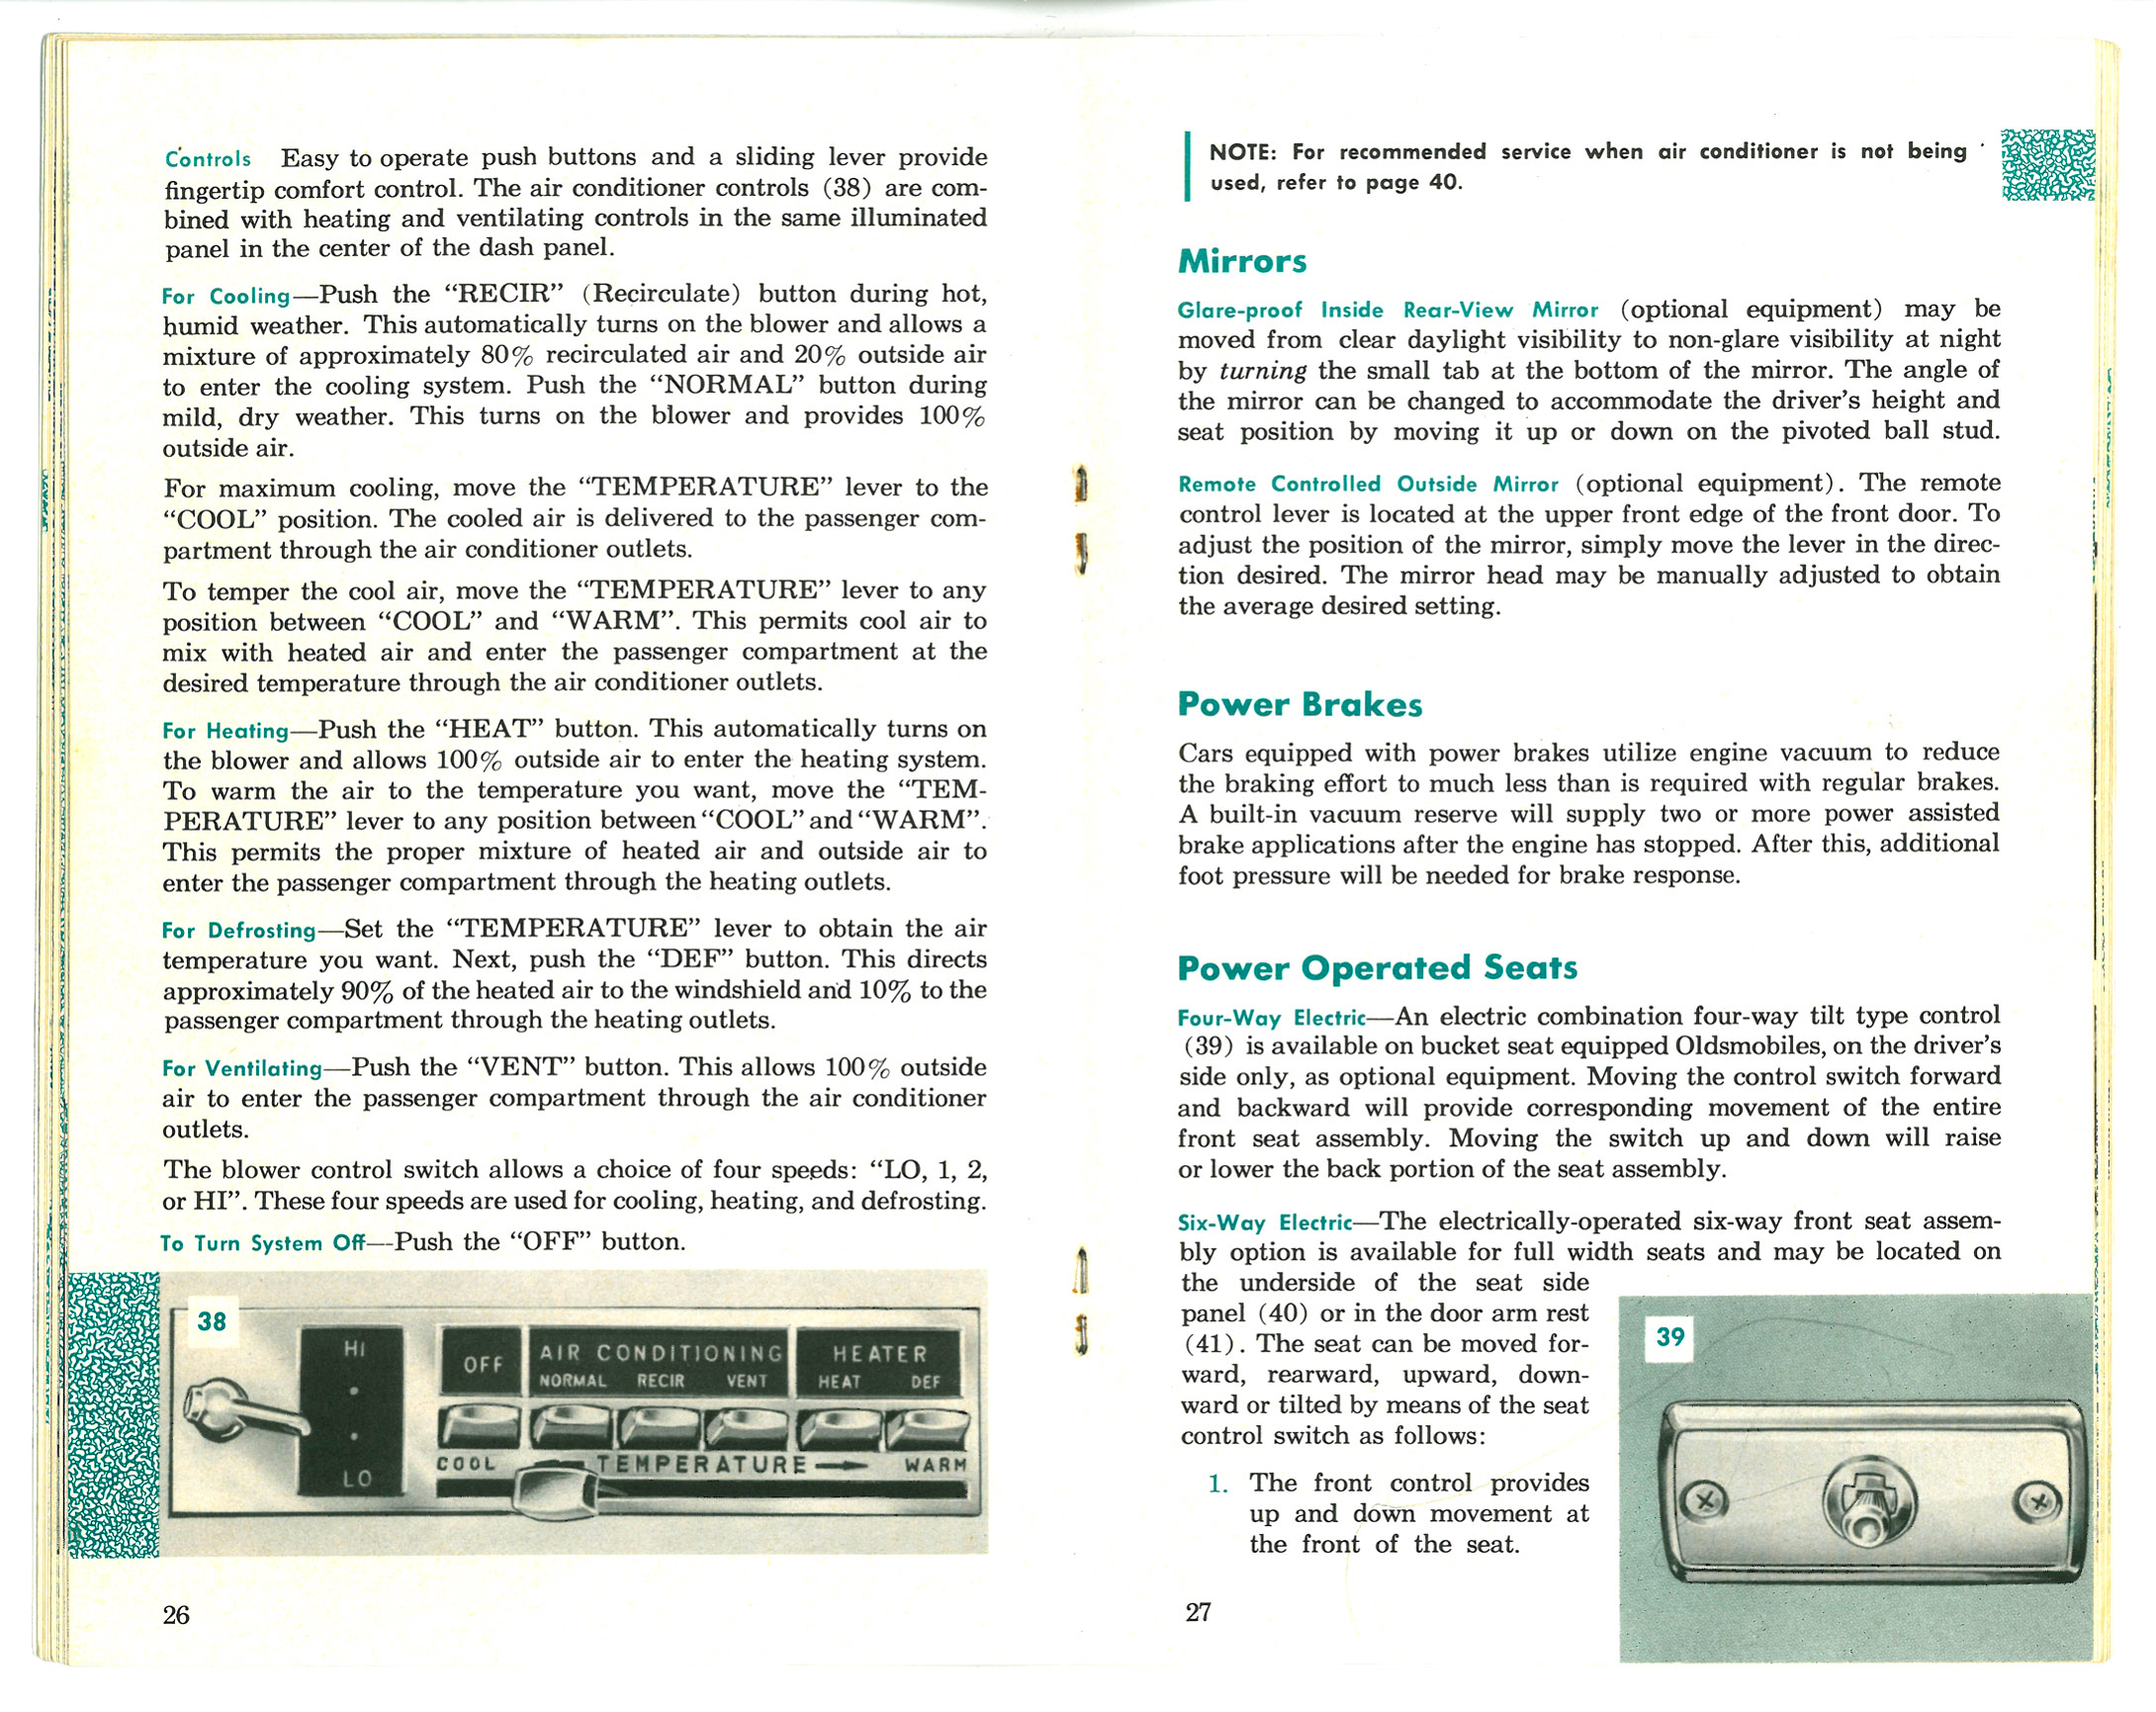 1966_Oldsmobile_owner_operating_manual_Page_15